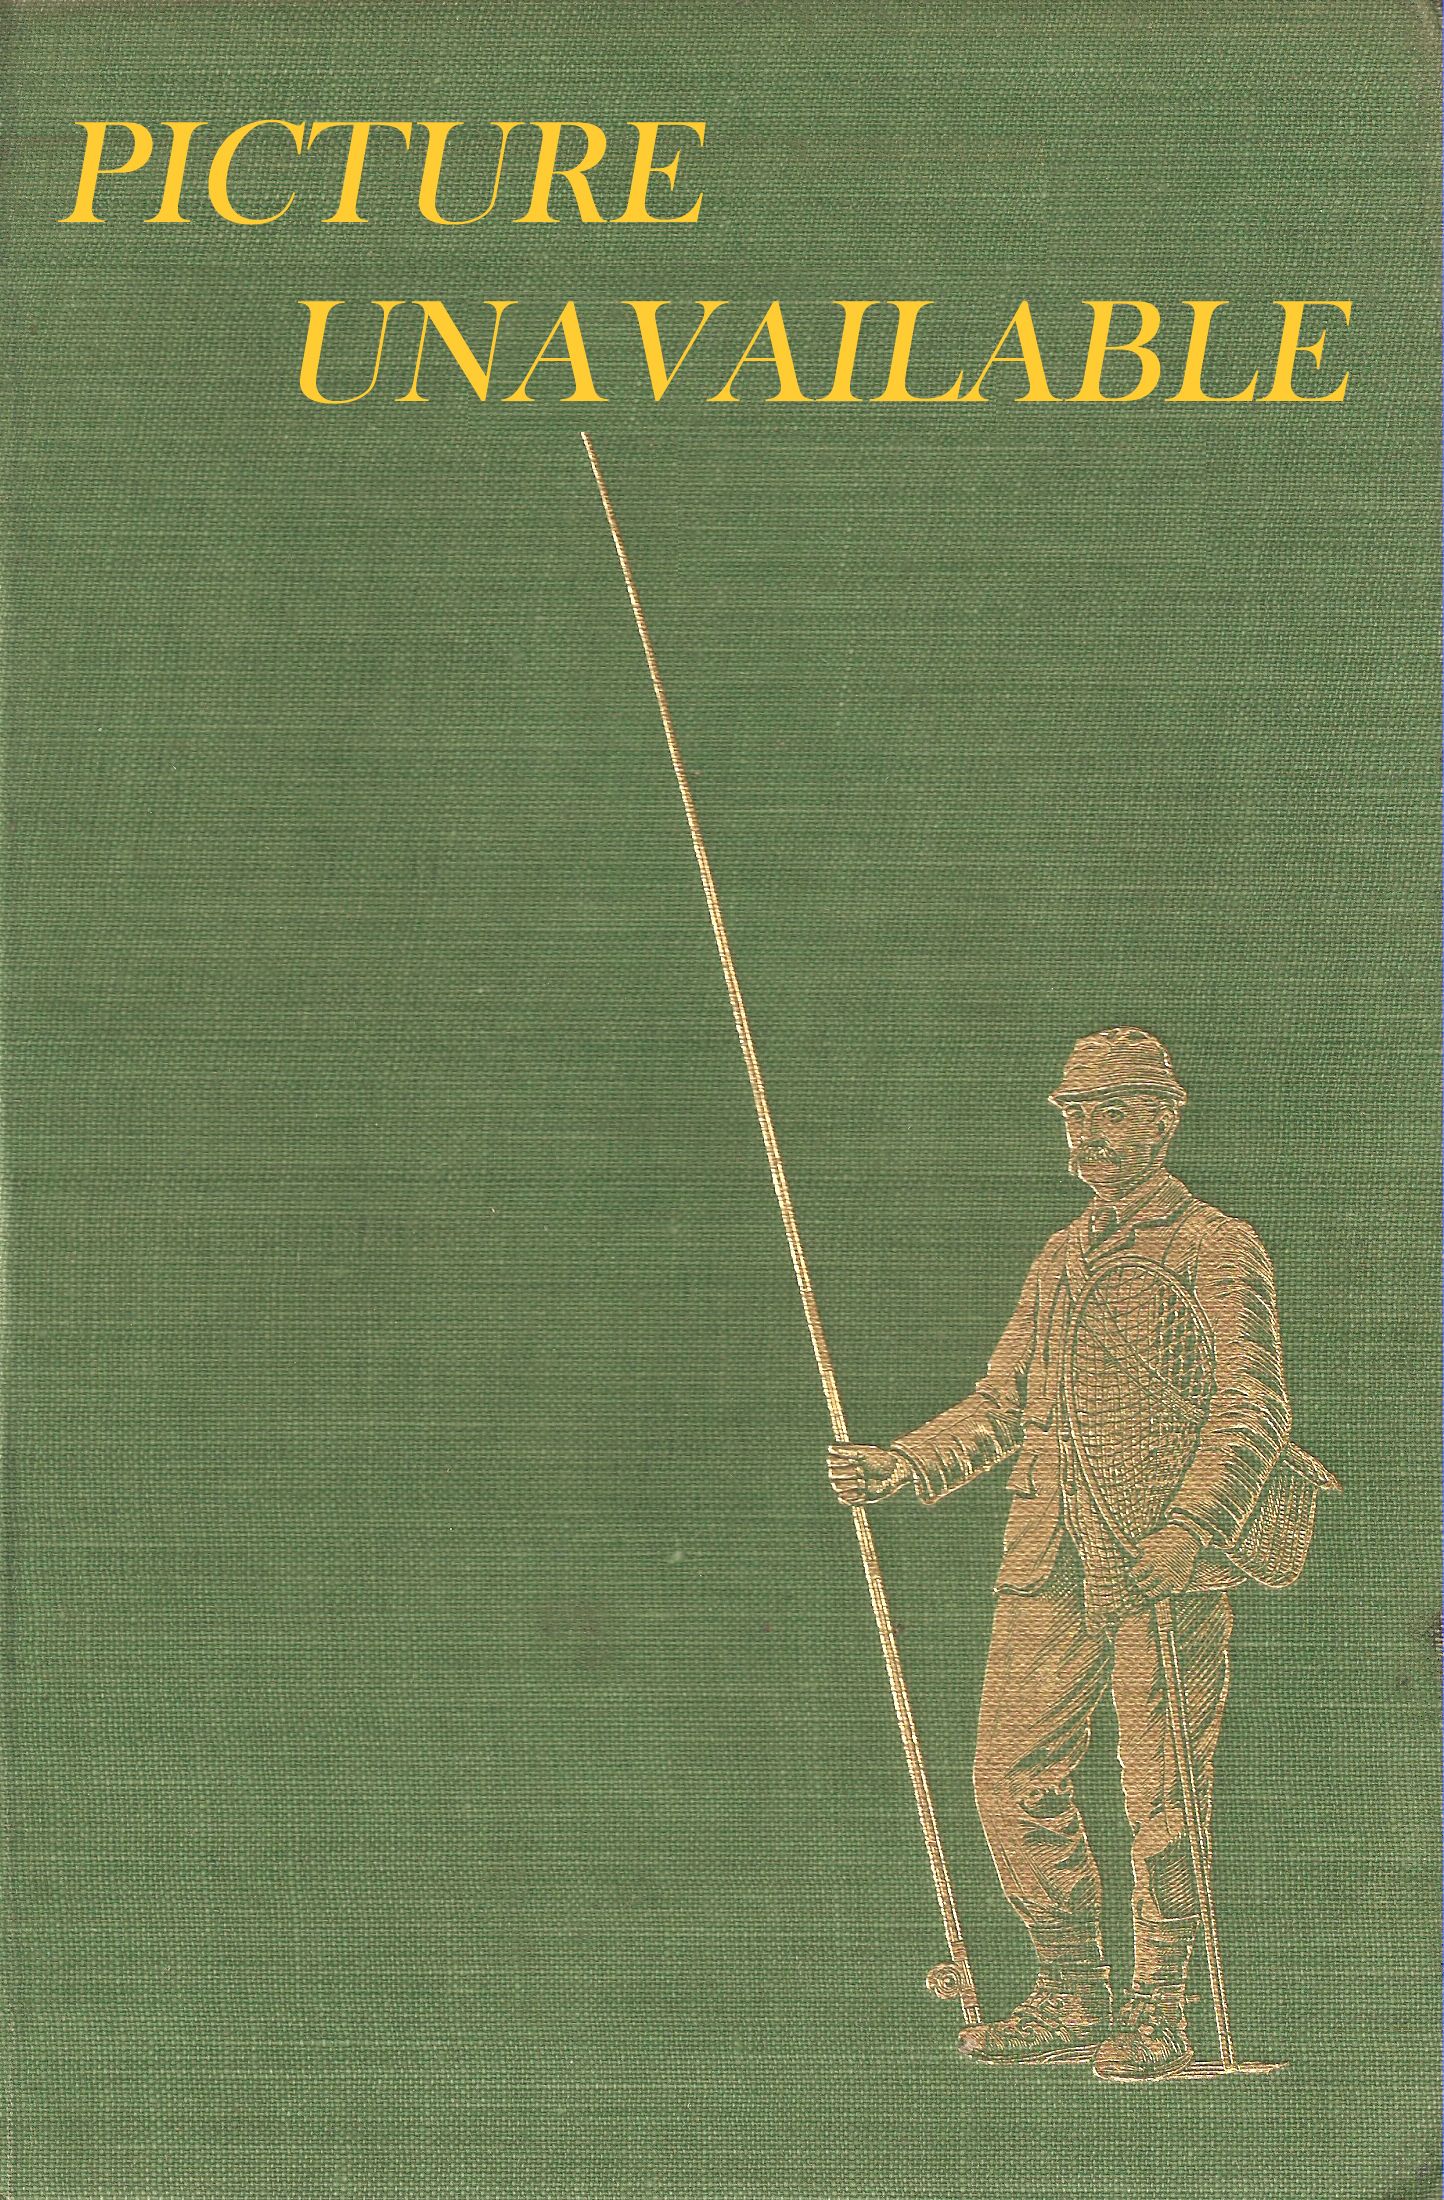 ANGLING. By Francis Francis. Second edition.